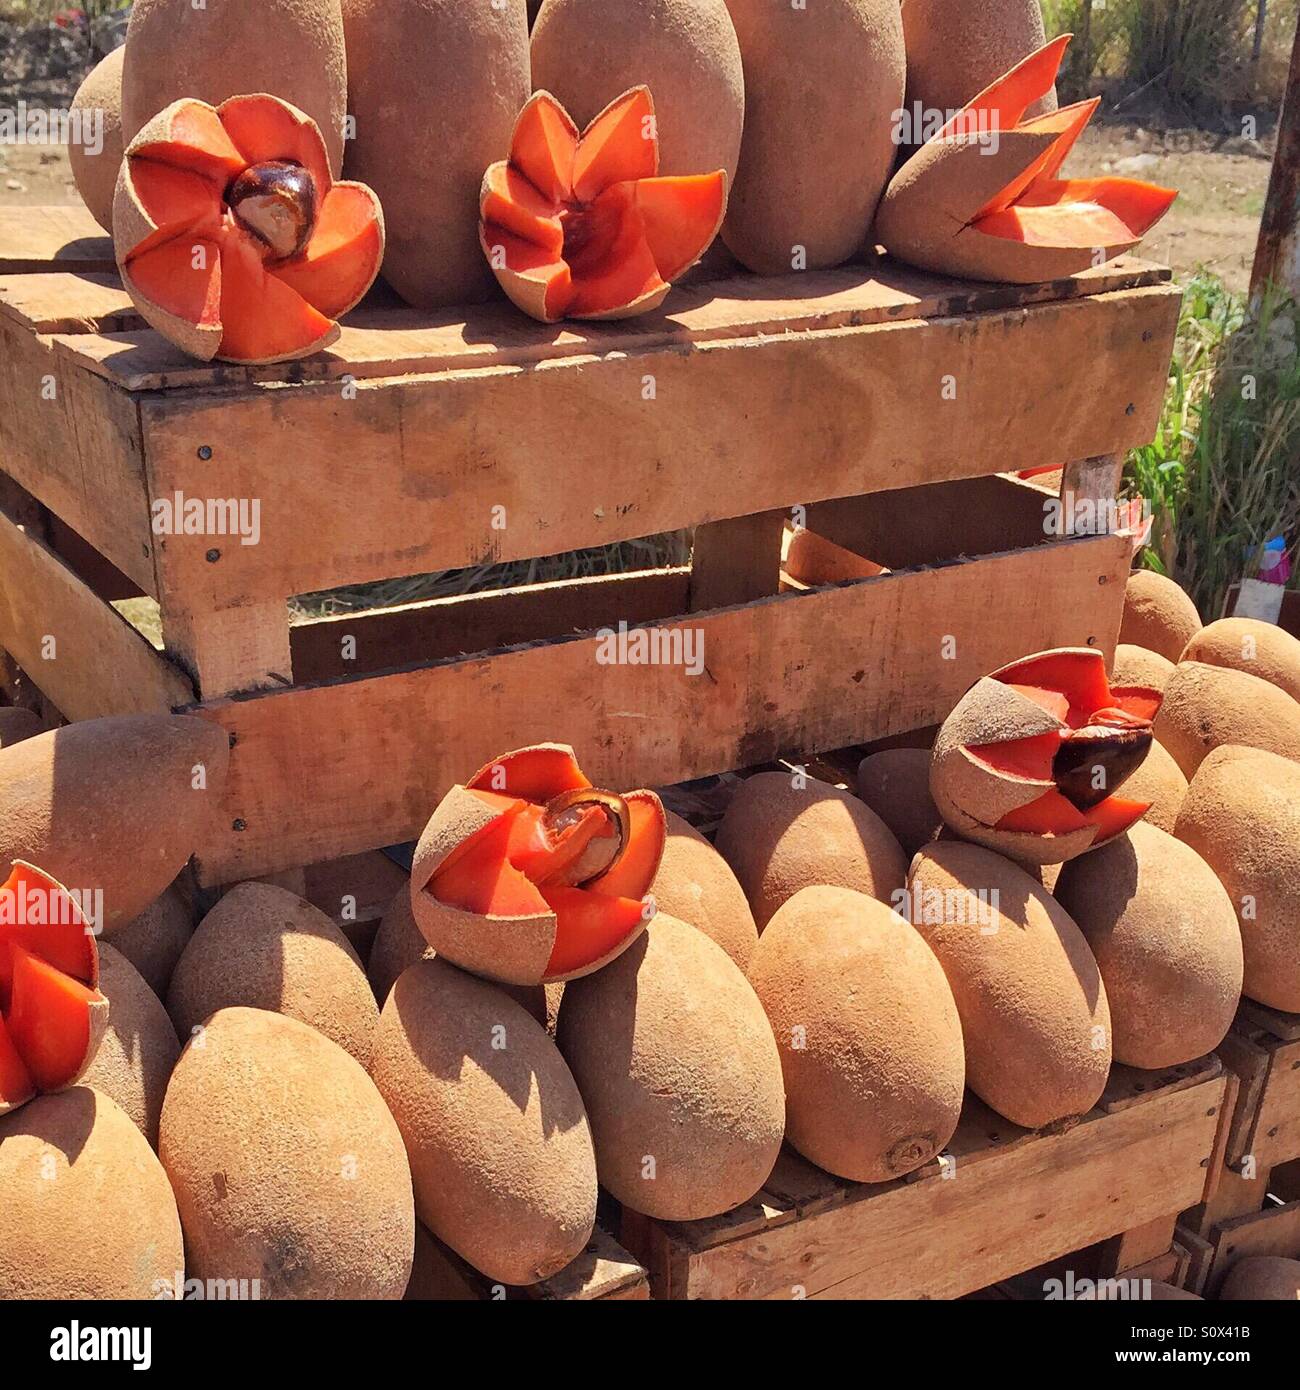 An attractive display of mamey fruit at a roadside stand in Nayarit, Mexico. Stock Photo